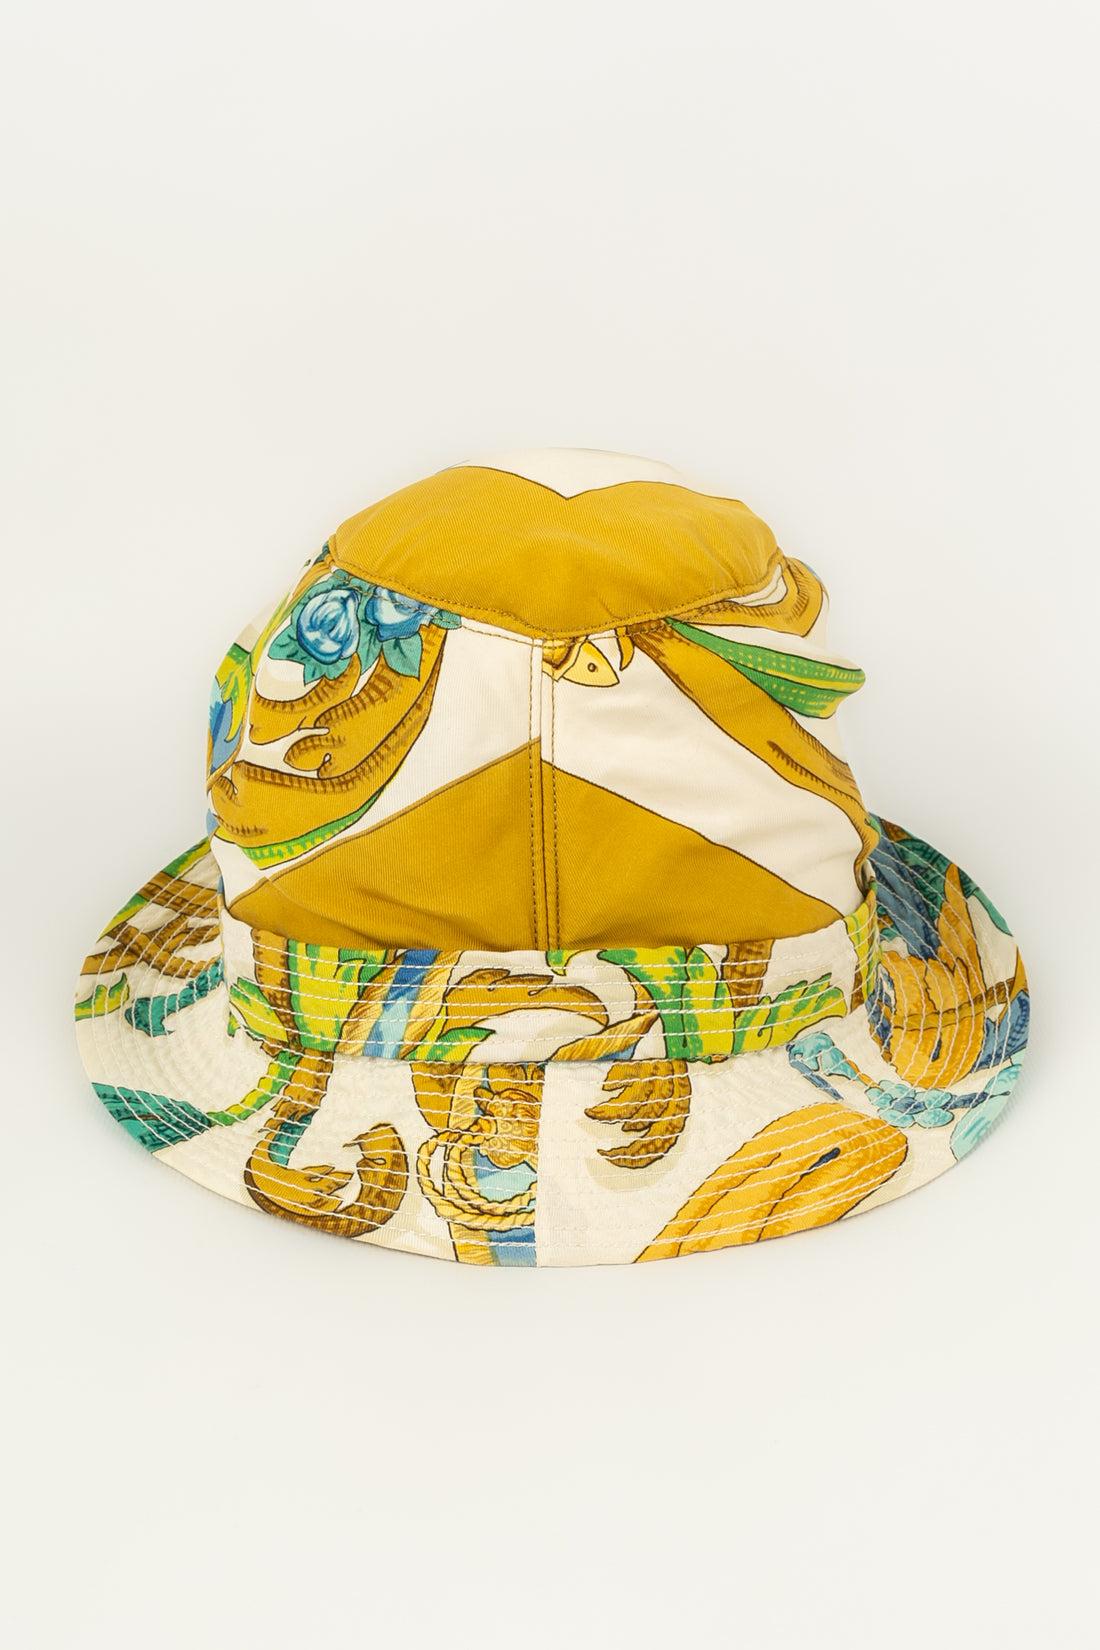 Hermès -Silk hat. To note, presence of stain on the inner lining.

Additional information: 
Dimensions: Circumference: about 51 cm
Condition: Good condition
Seller Ref number: CHP68